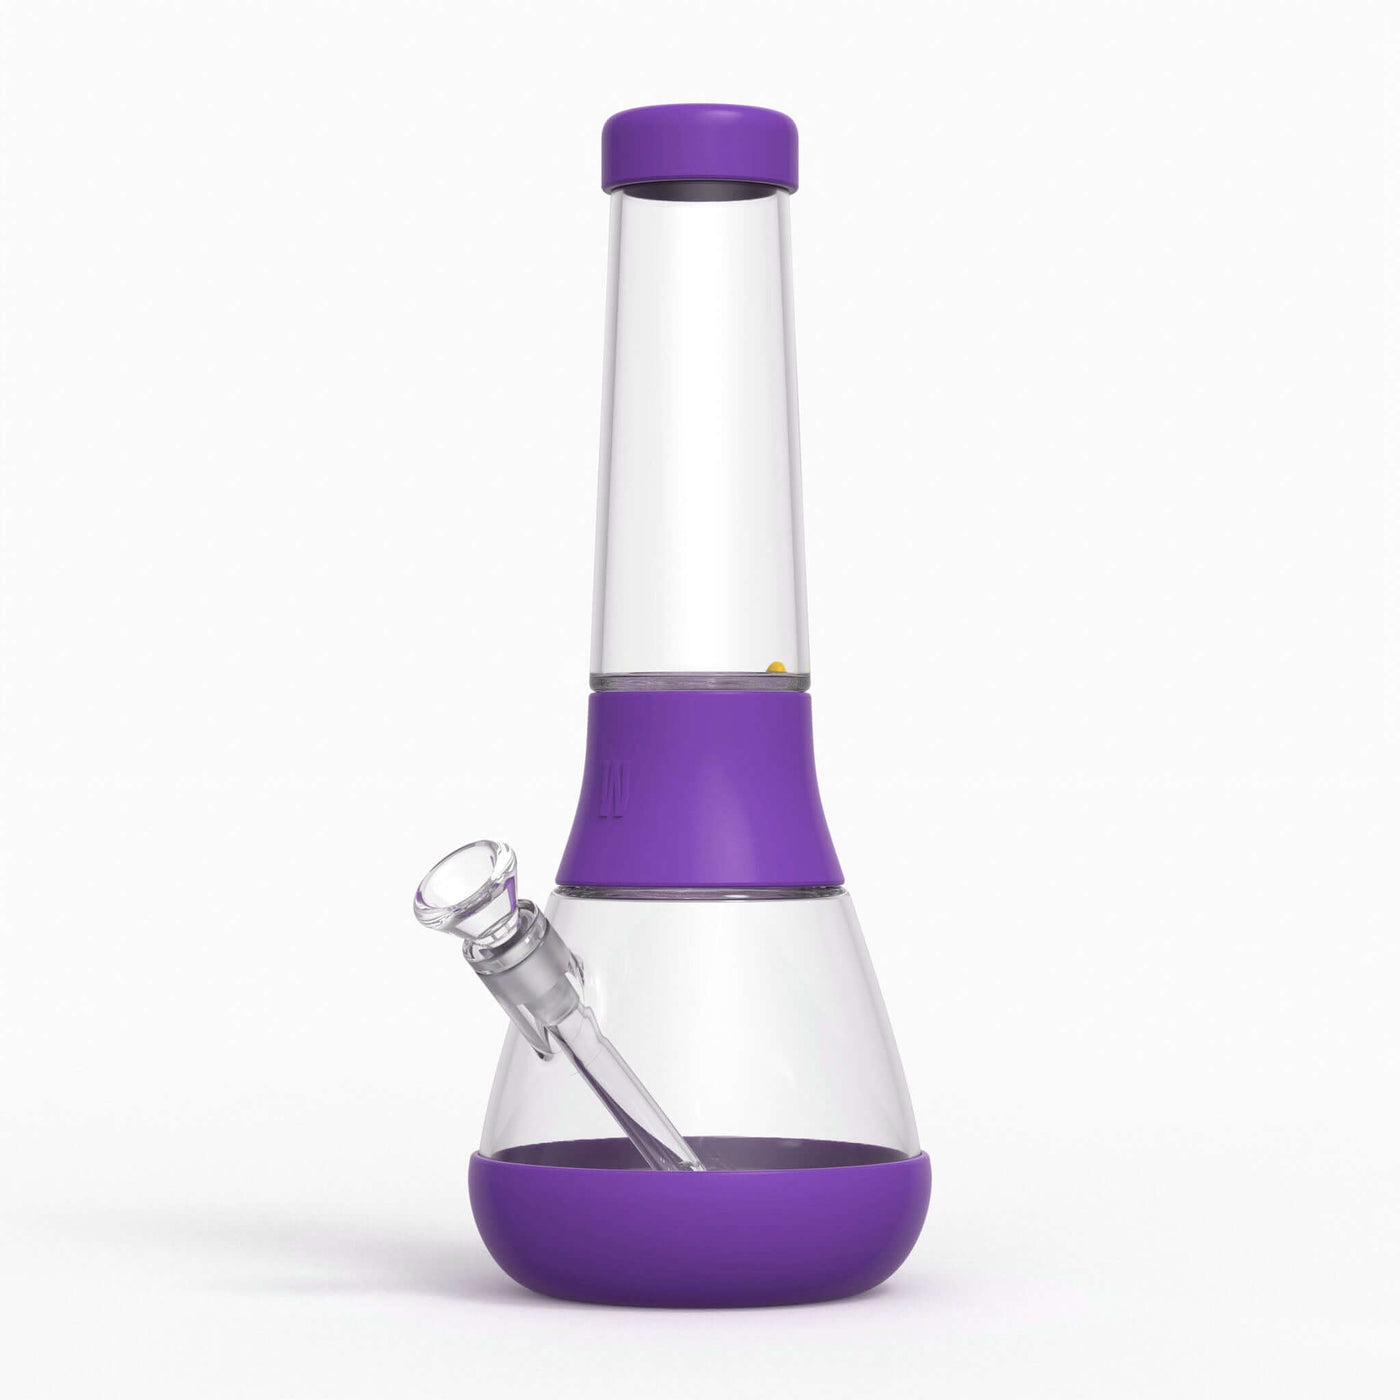 Render of a Weeday detachable glass bong with grape purple silicone covers, on a white background.